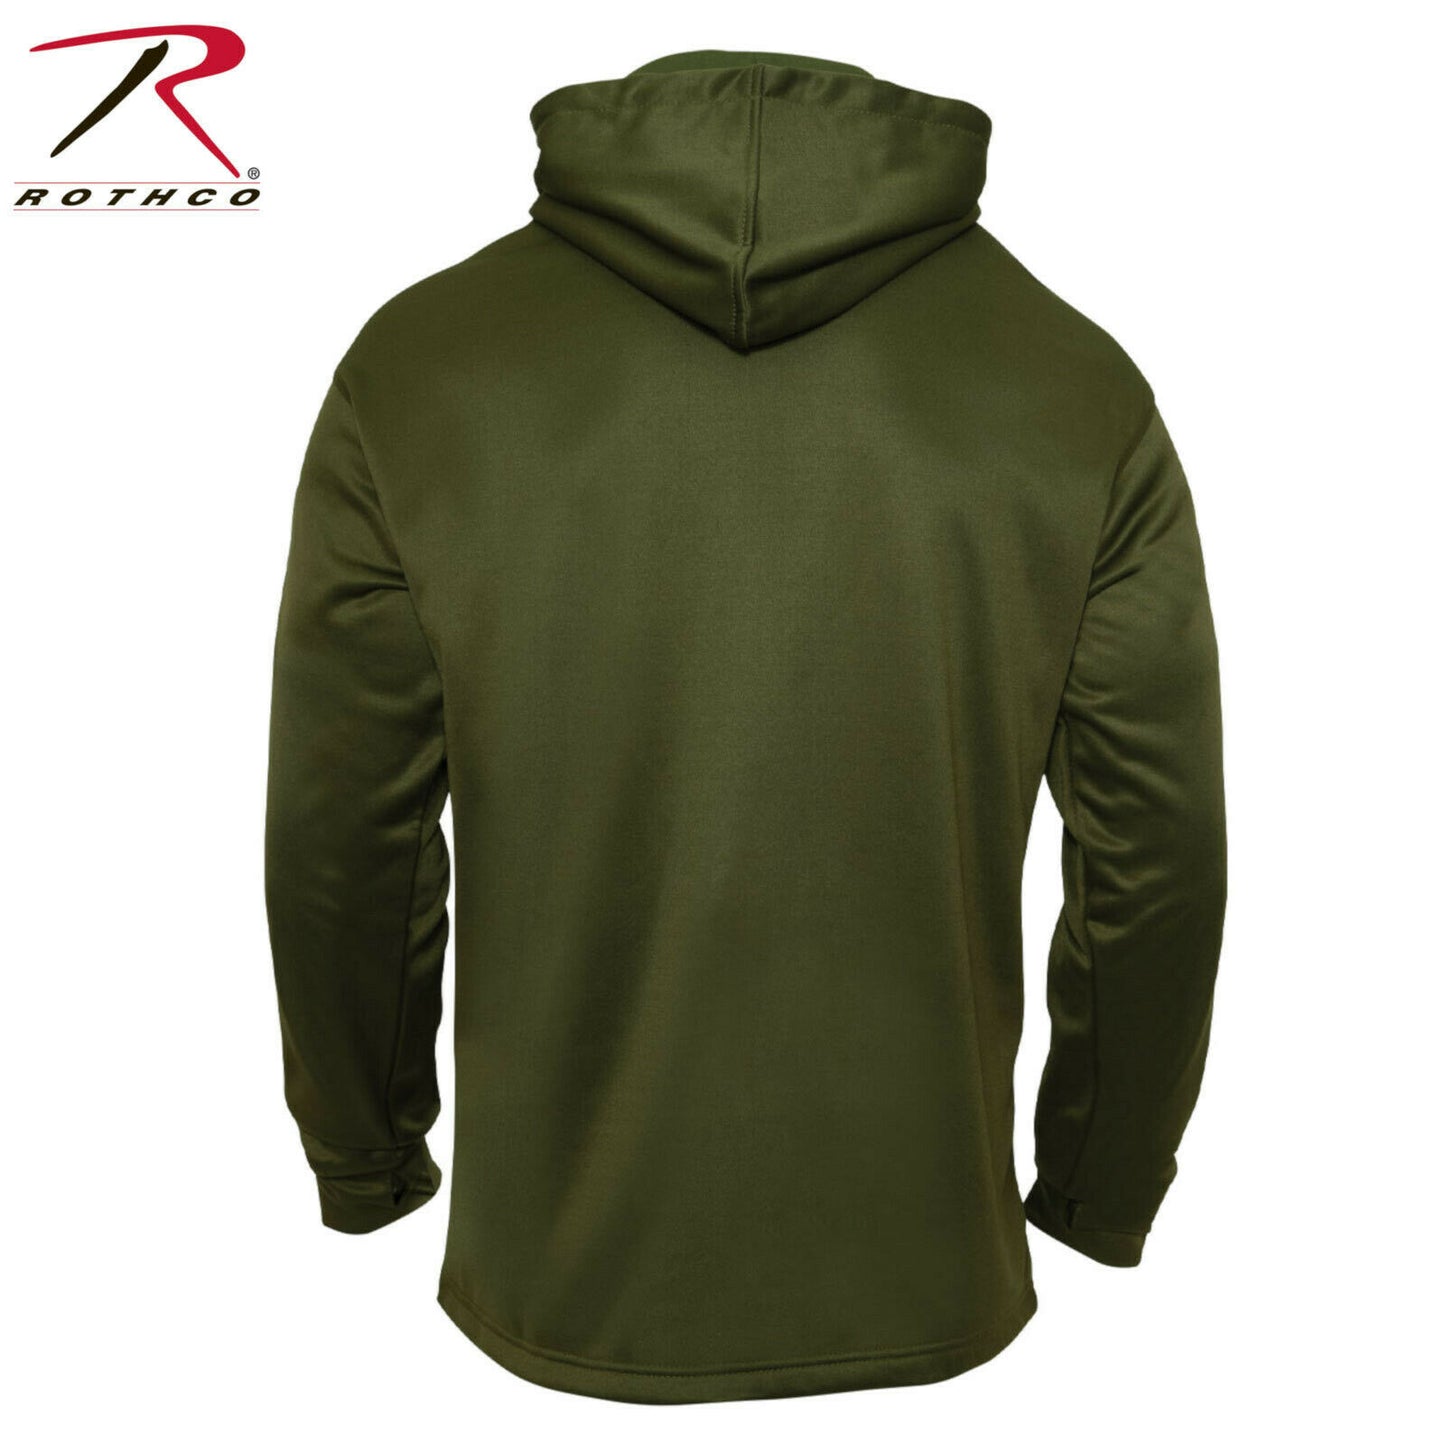 Rothco Men's Olive Drab Concealed Carry Hoodie Sweatshirt w/ US Flag Patch